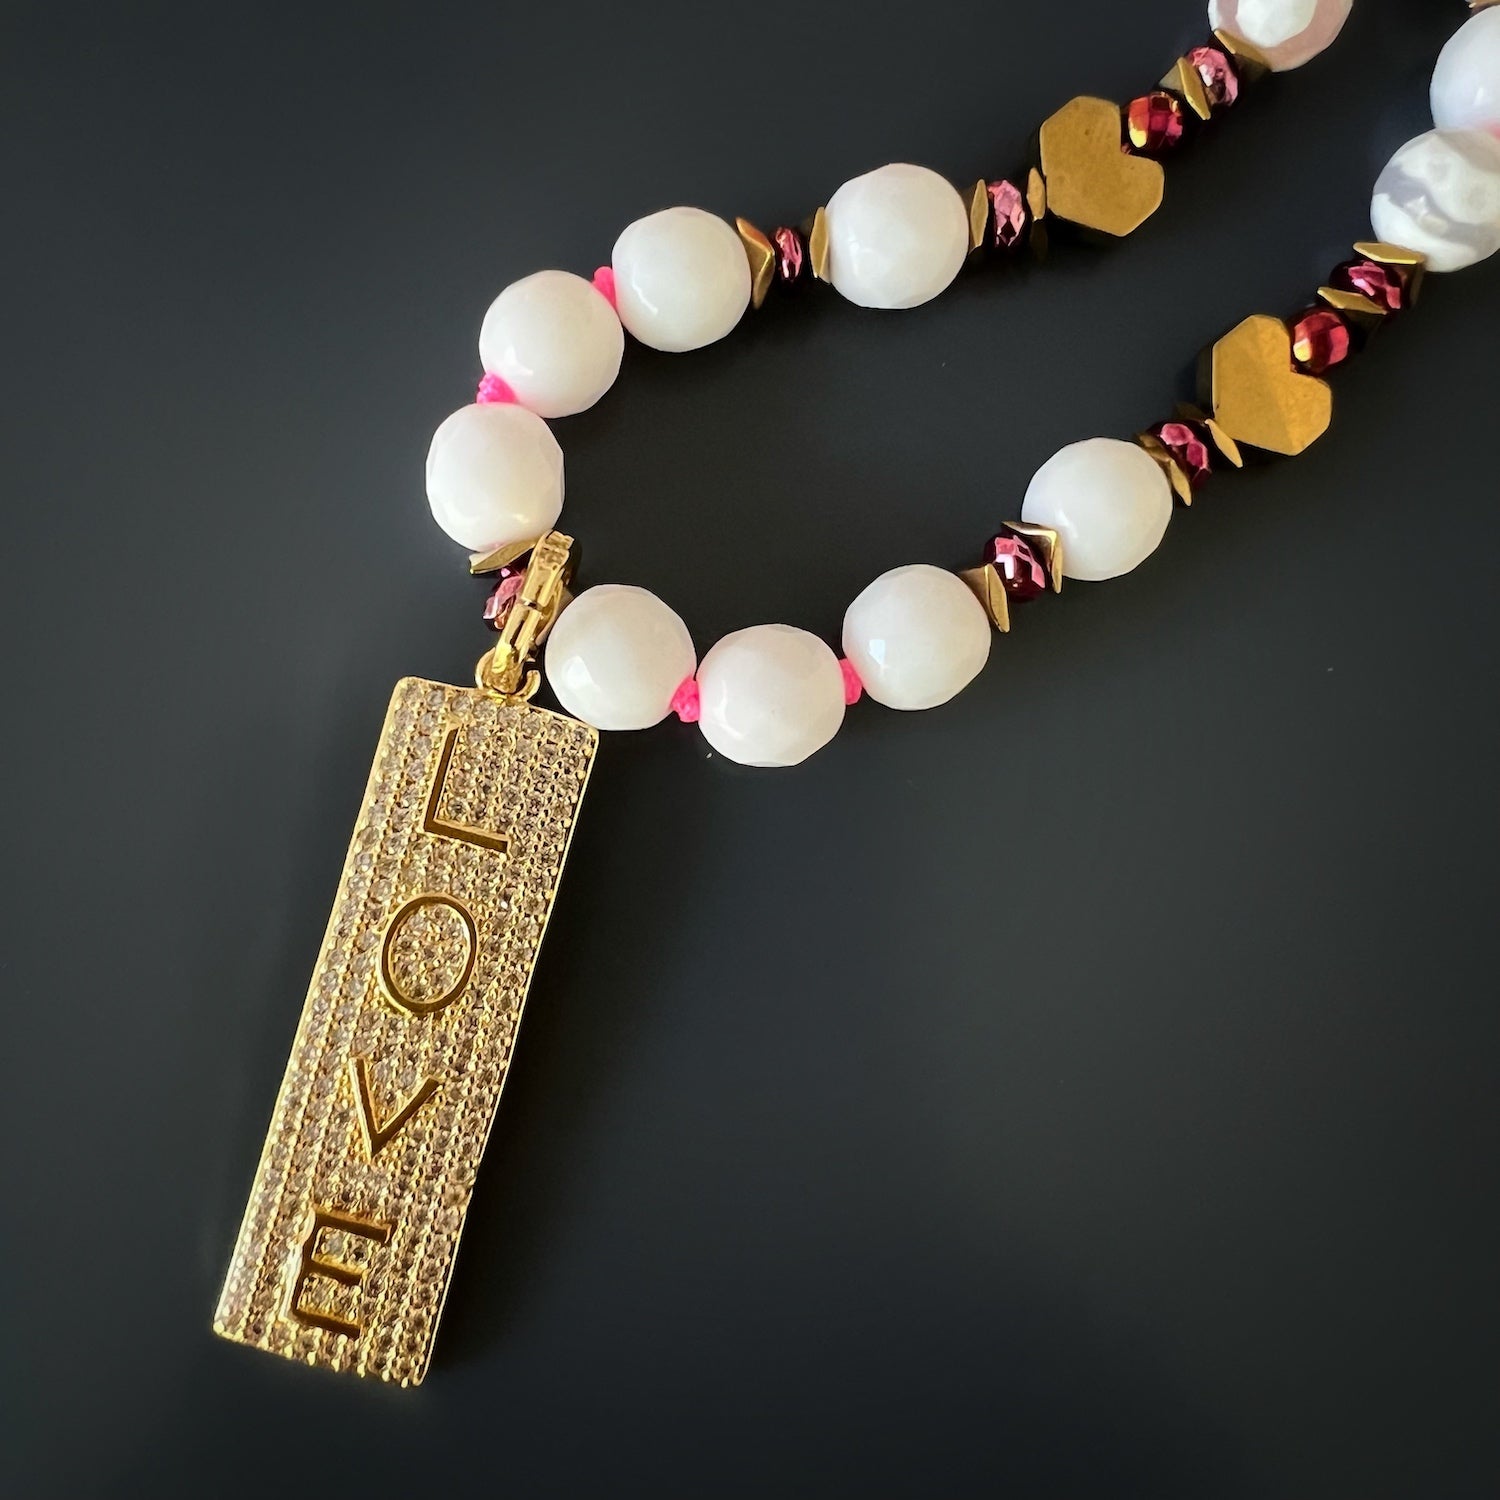 Power Of Love Necklace featuring a combination of Jade beads, gold-plated LOVE pendant, and turquoise stone beads, radiating a sense of serenity and positive energy.